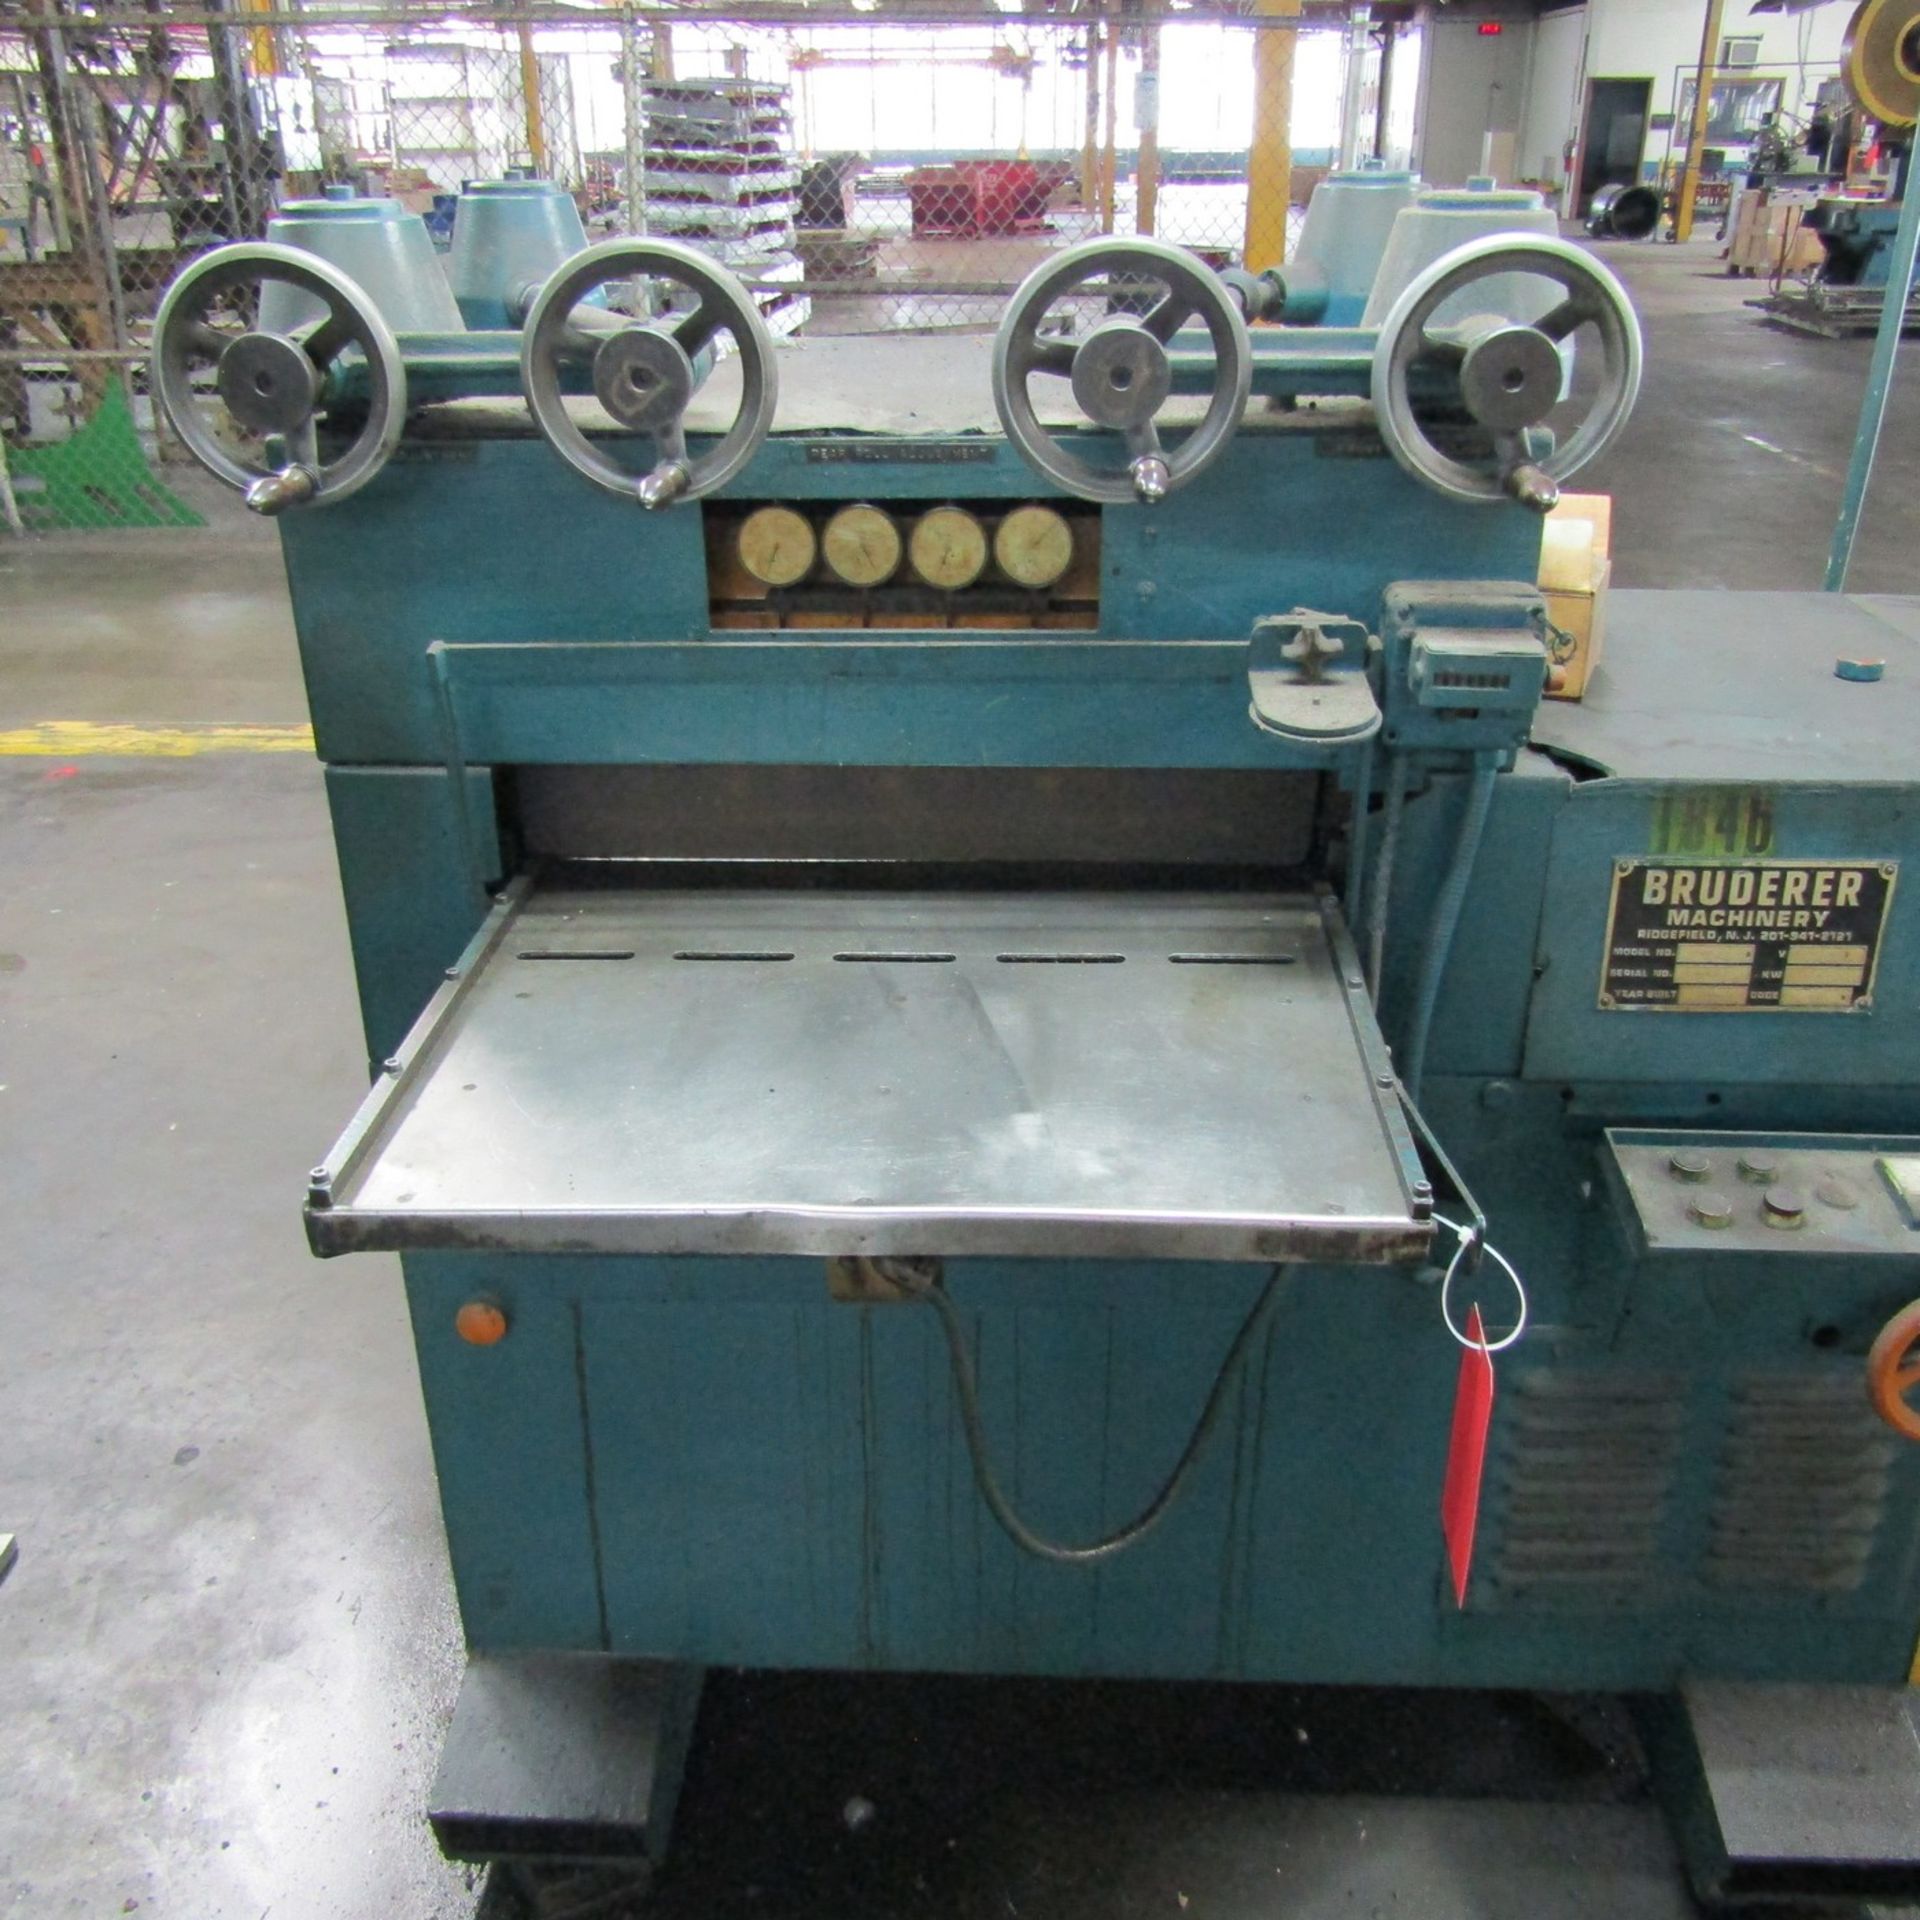 Bruderer 23-1/4 in. wide Model 3060.1 Precision Parts Straightening and Leveling Machine, S/N: 70 - Image 2 of 6